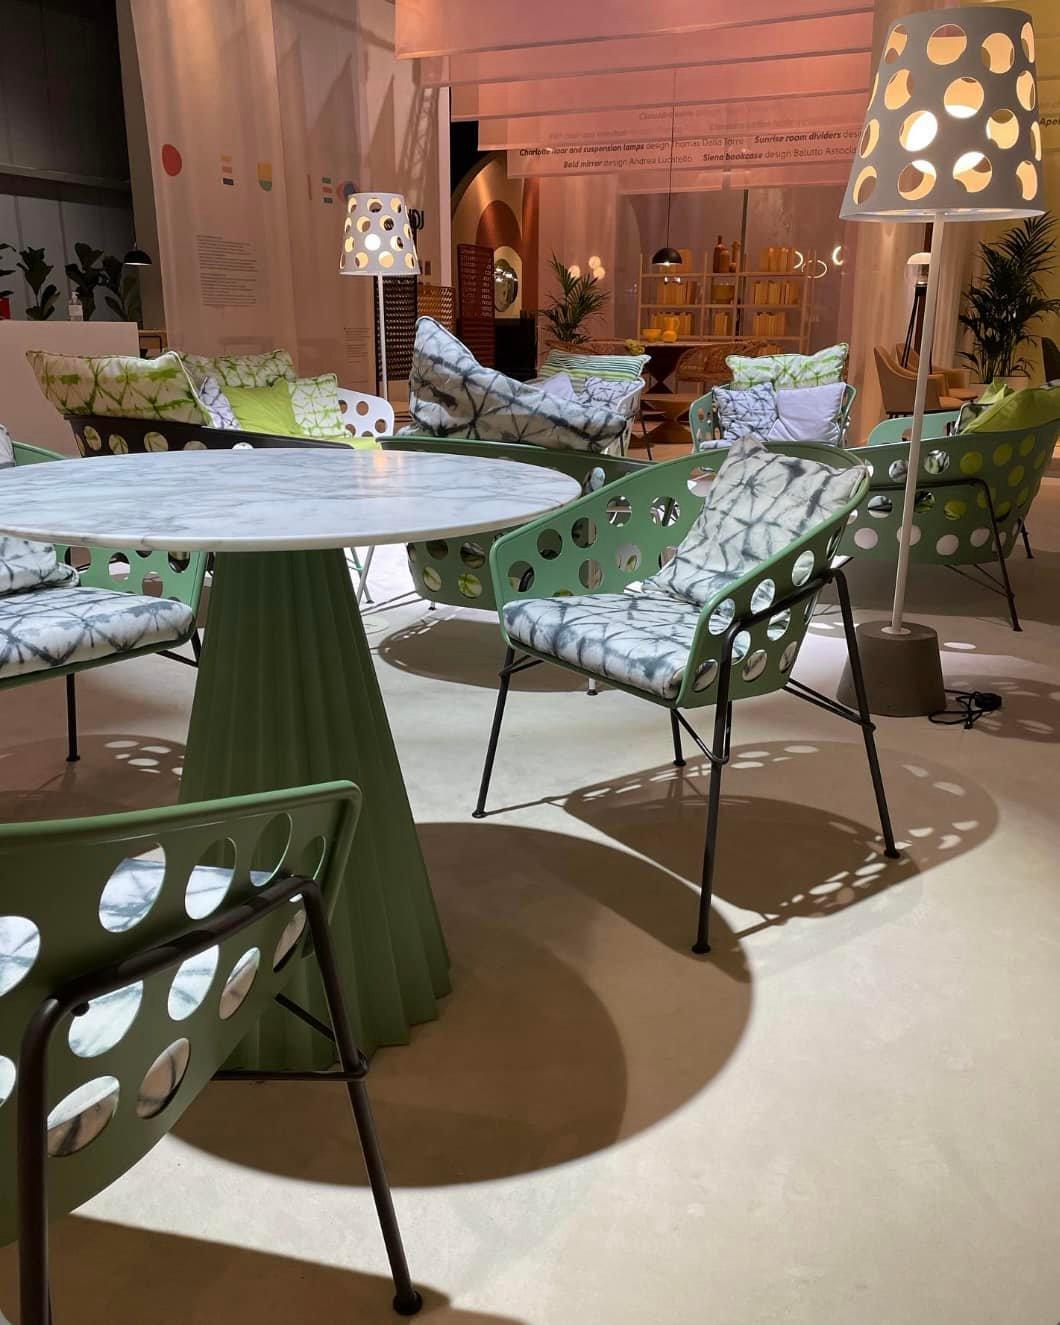 Dining table in lacquered metal, suitable for indoor and outdoor use.
This table has a pleated sculptural base inspired by the world of fashion and the iconic pleated work of the 50s and 60s, and still trendy in fashion today. The table is offered